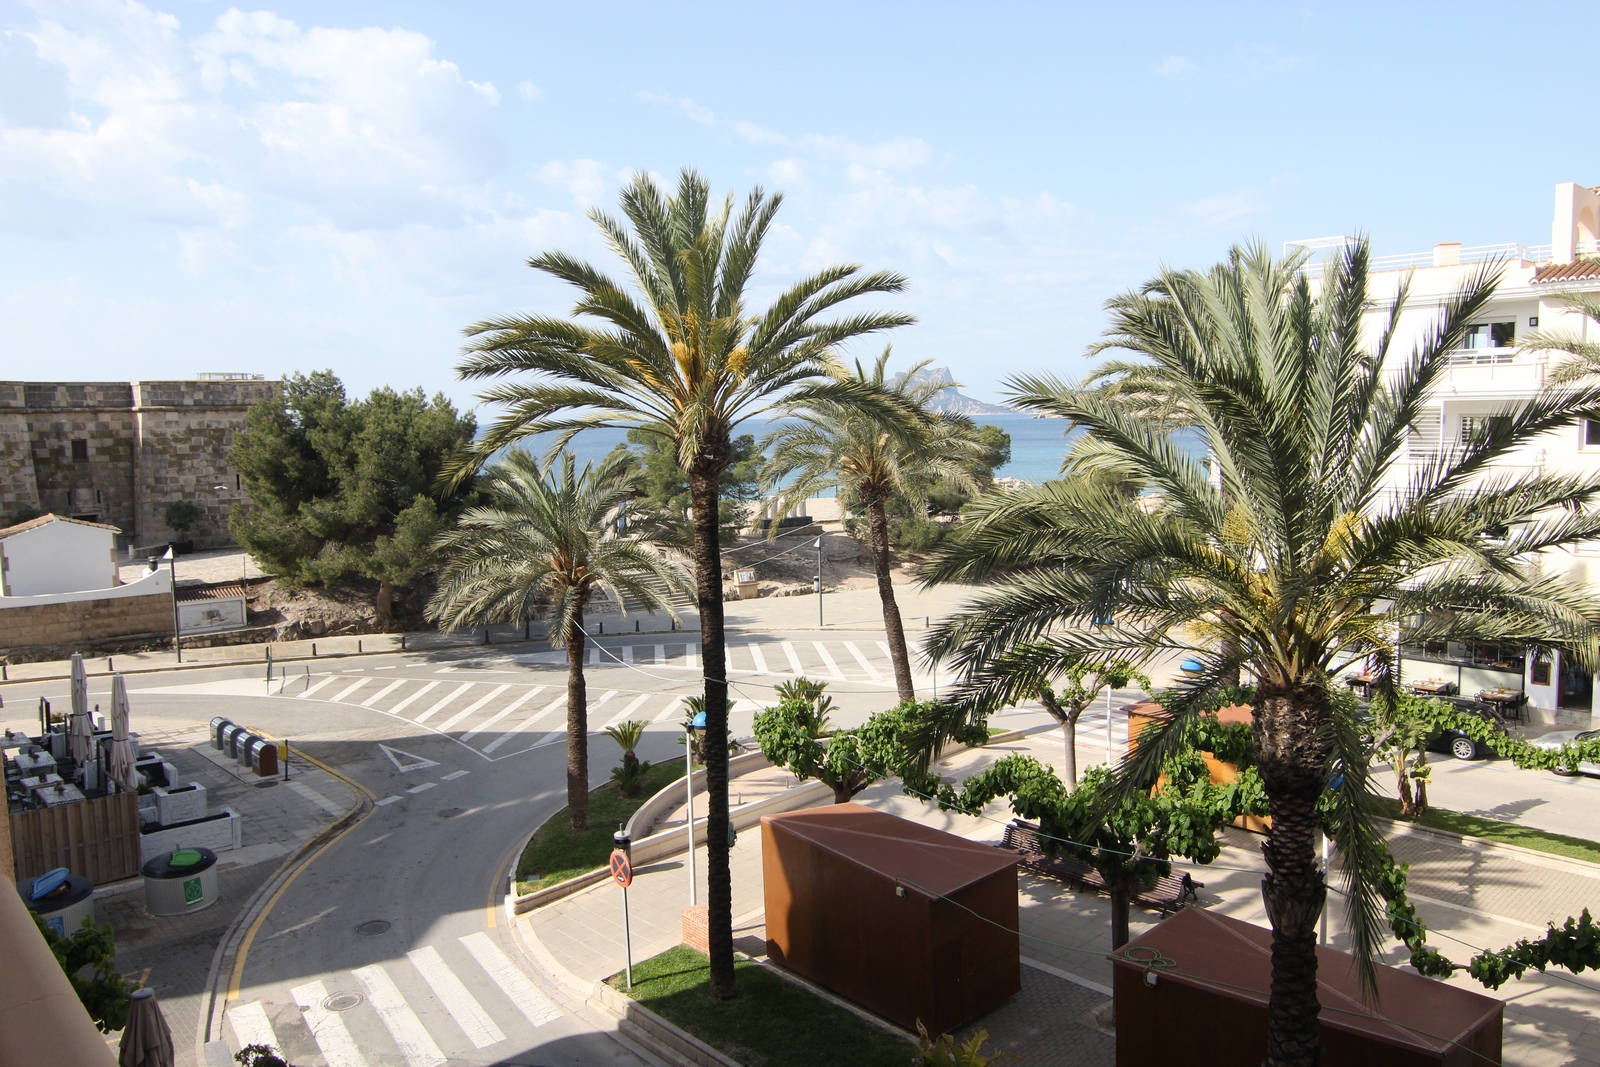 Apartment for sale with sea views in Moraira.